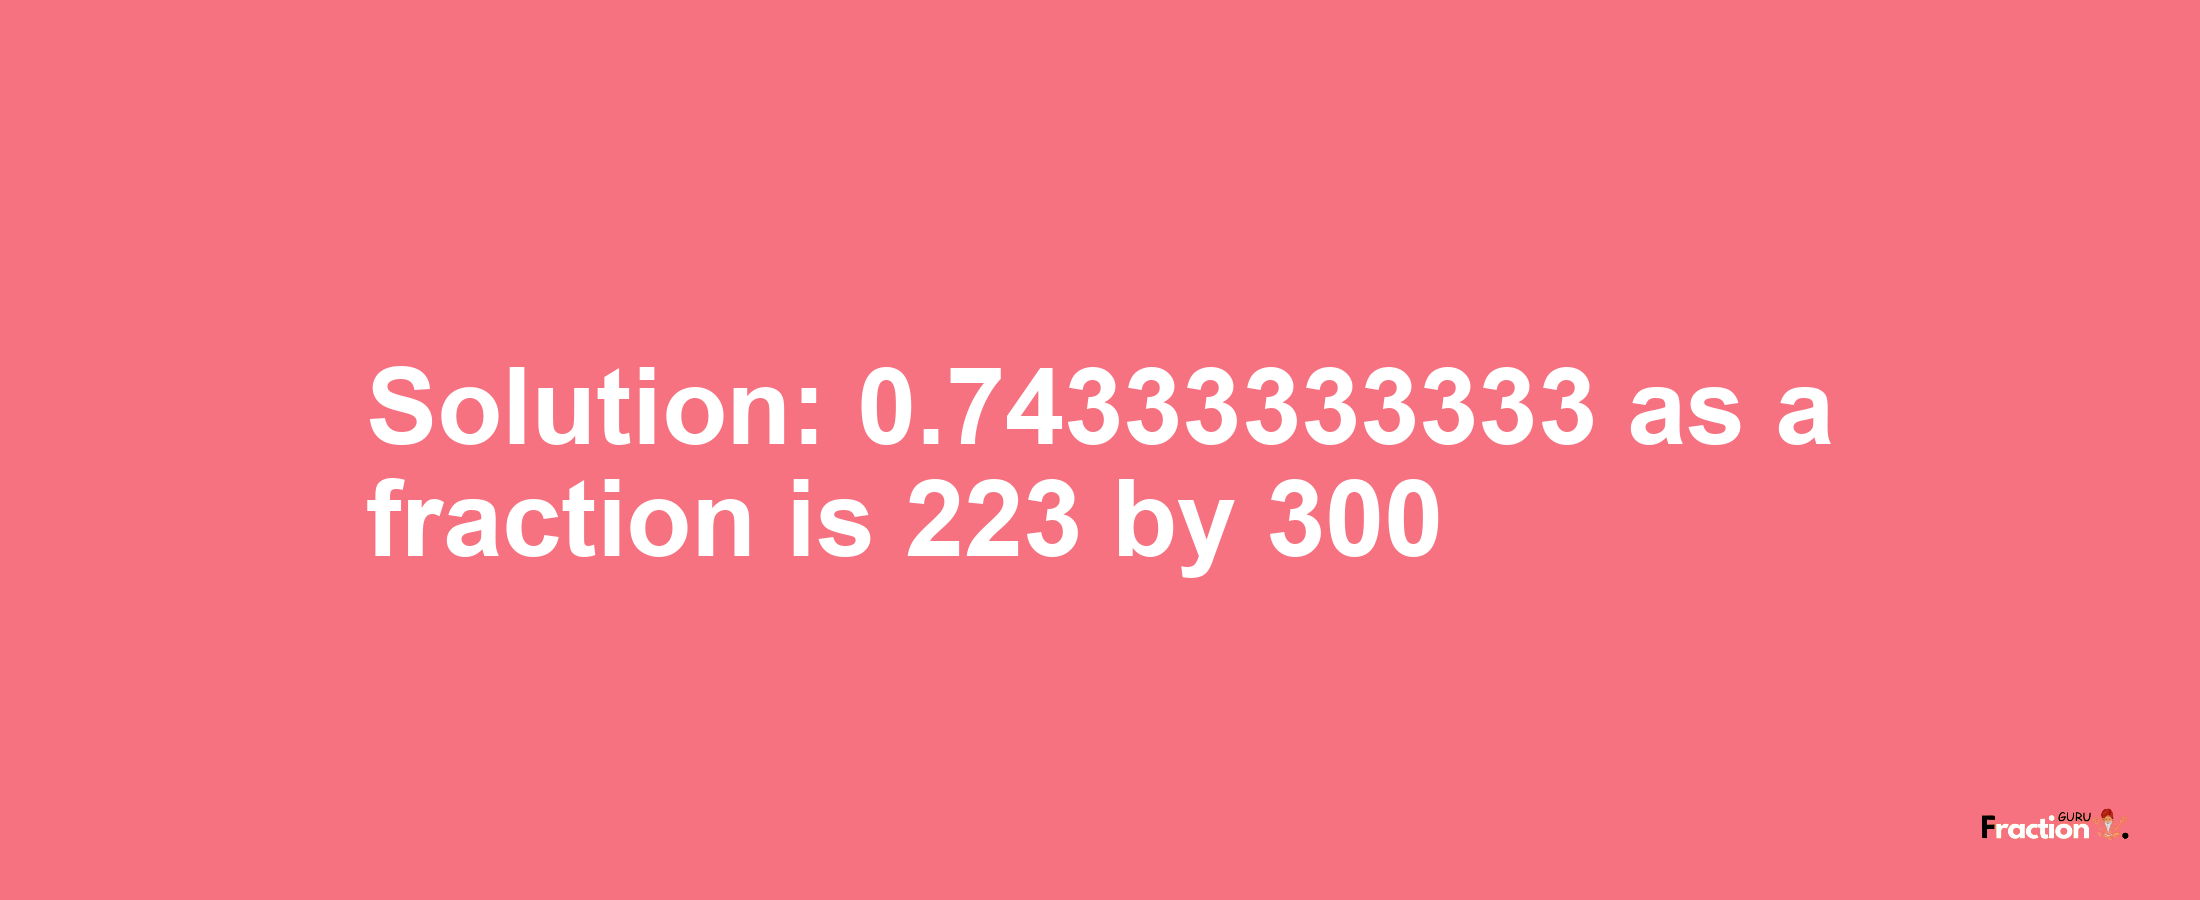 Solution:0.74333333333 as a fraction is 223/300